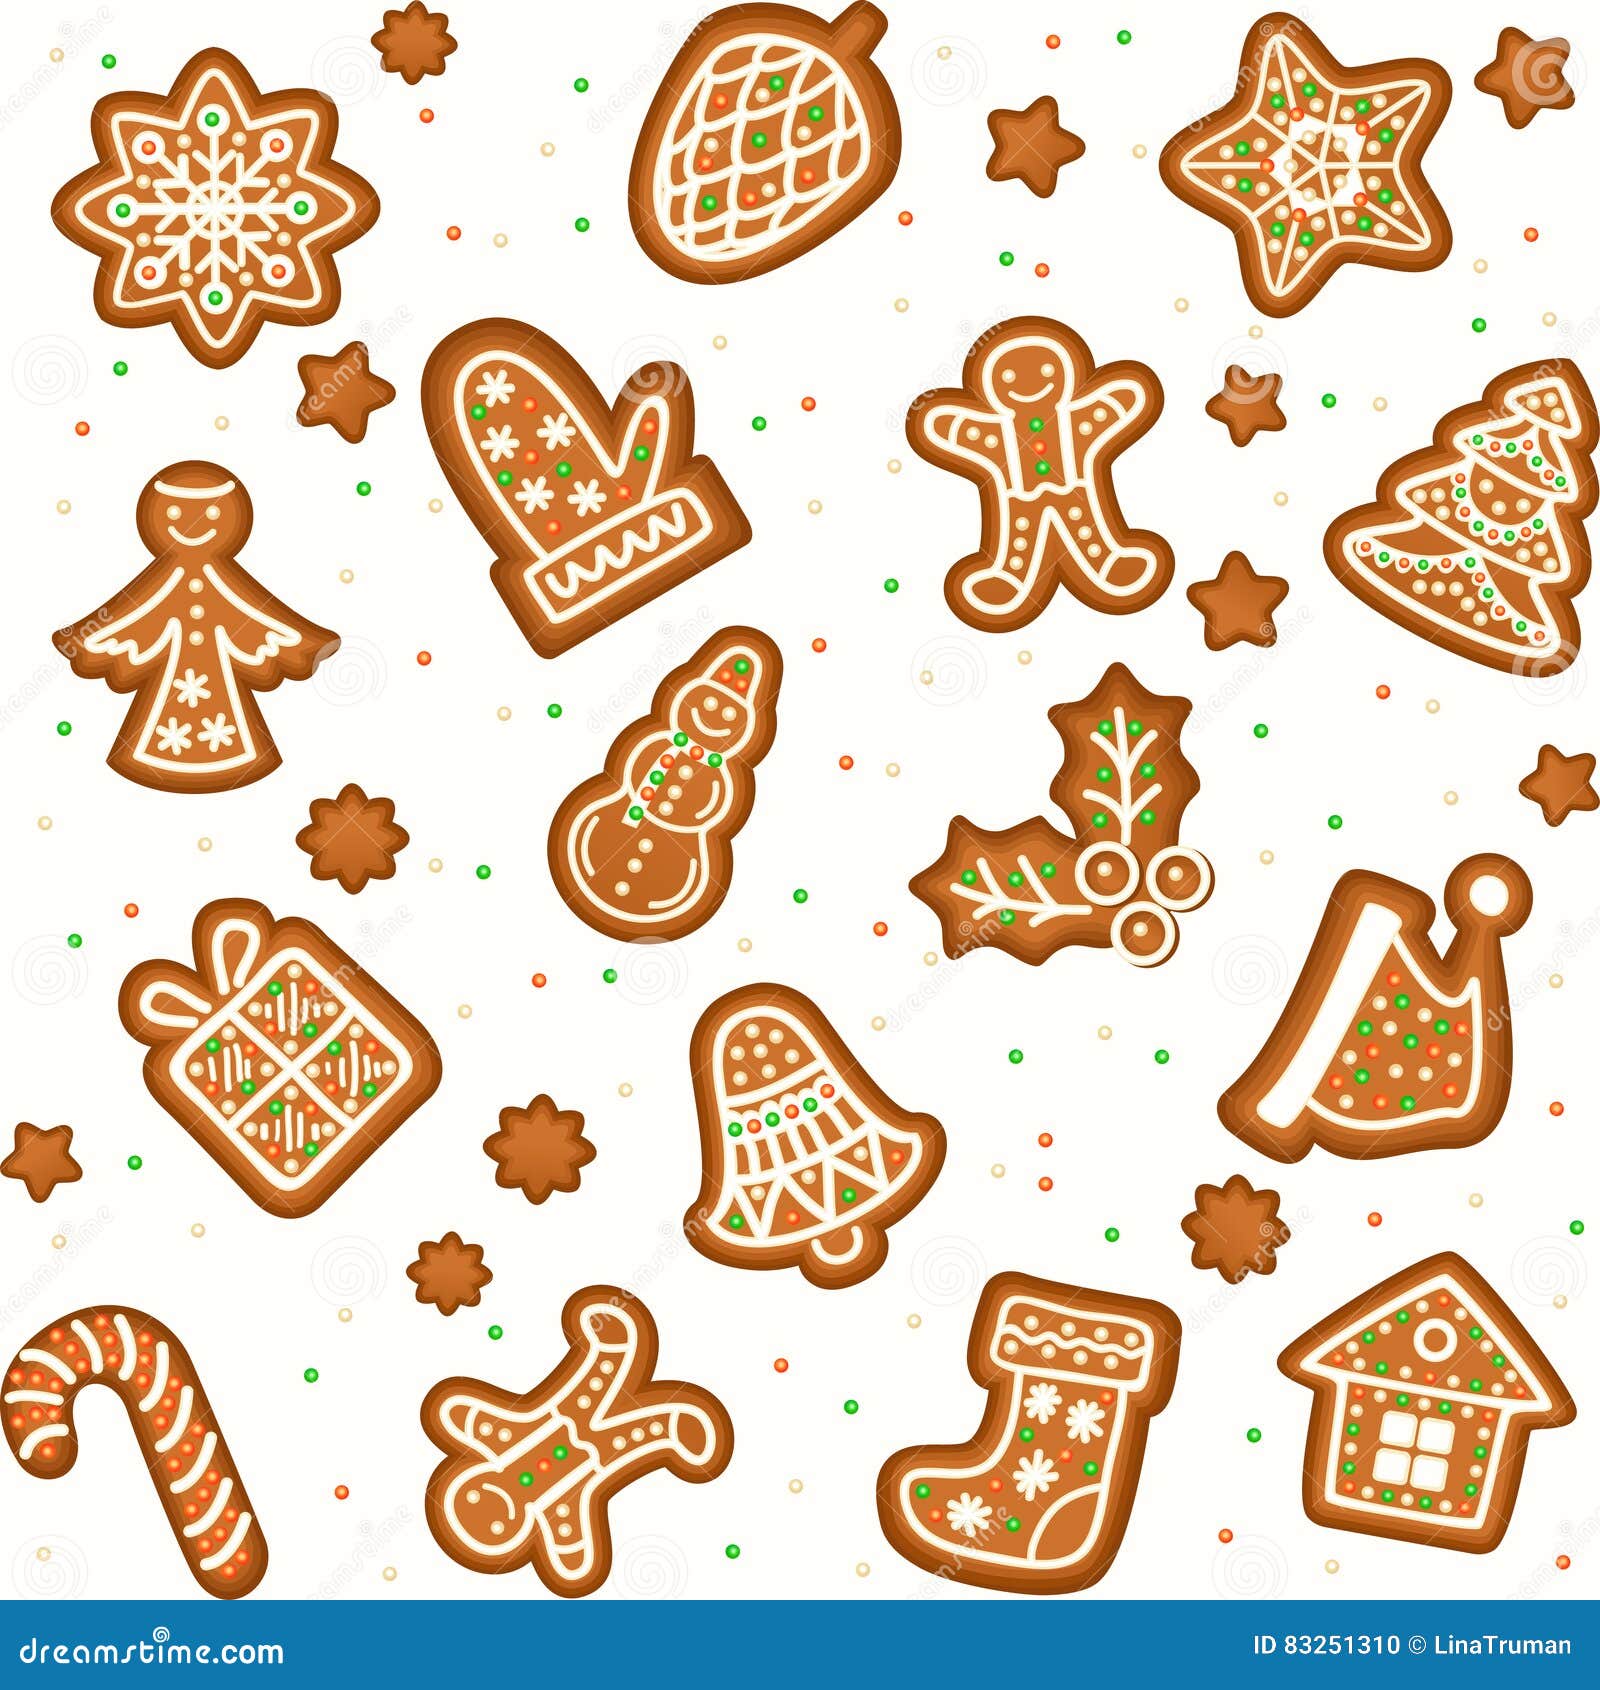 Biscotti Di Natale Gingerbread.Seamless Pattern With Gingerbread Christmas Cookies Stock Vector Illustration Of Decorative Homemade 83251310